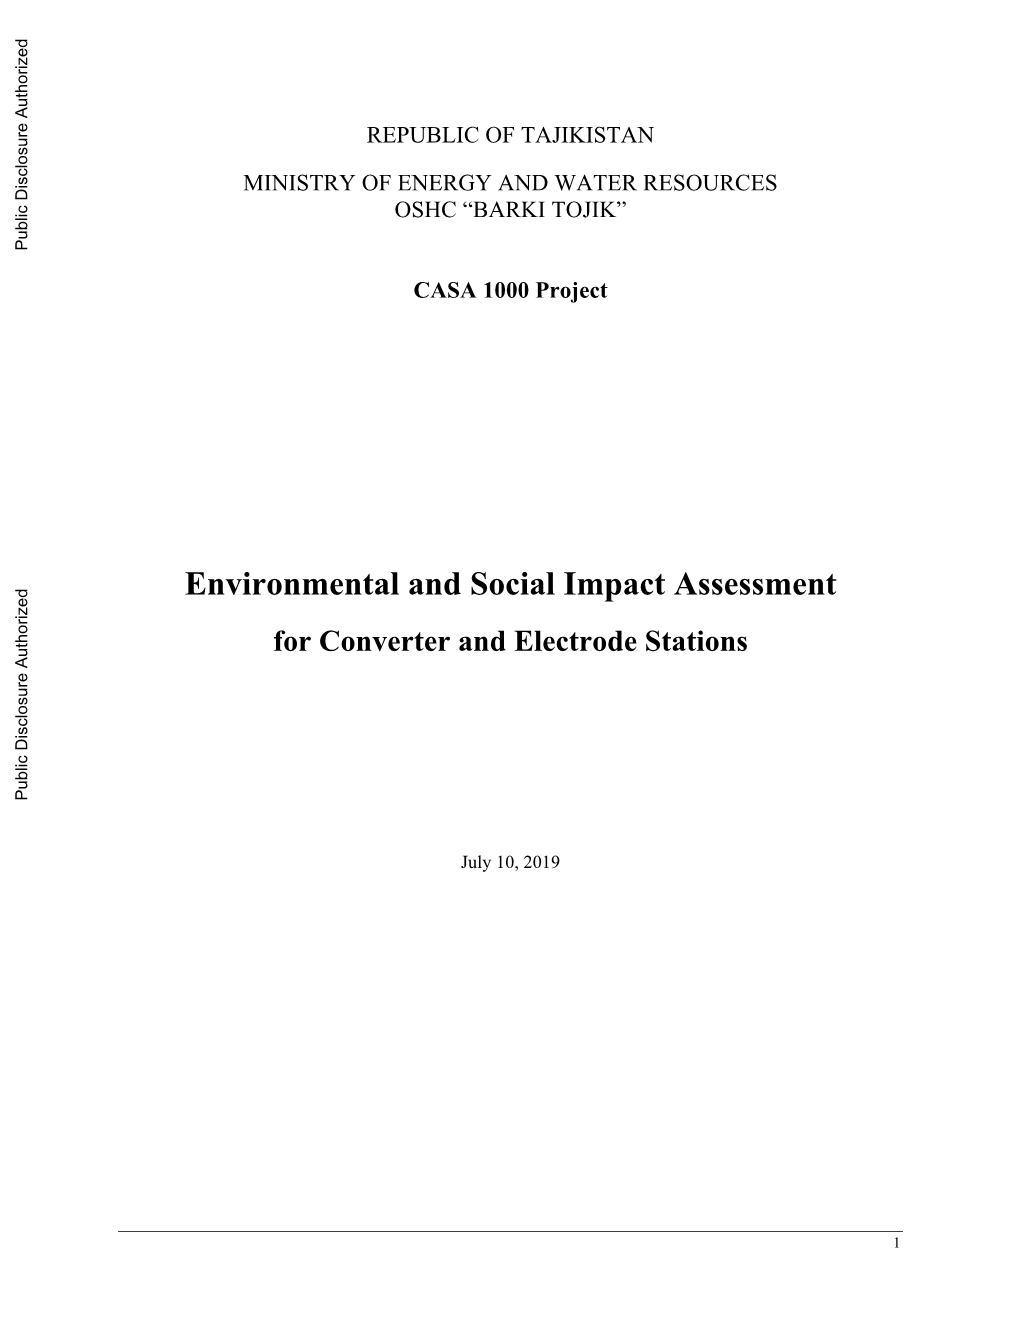 Environmental and Social Impact Assessment for Converter And